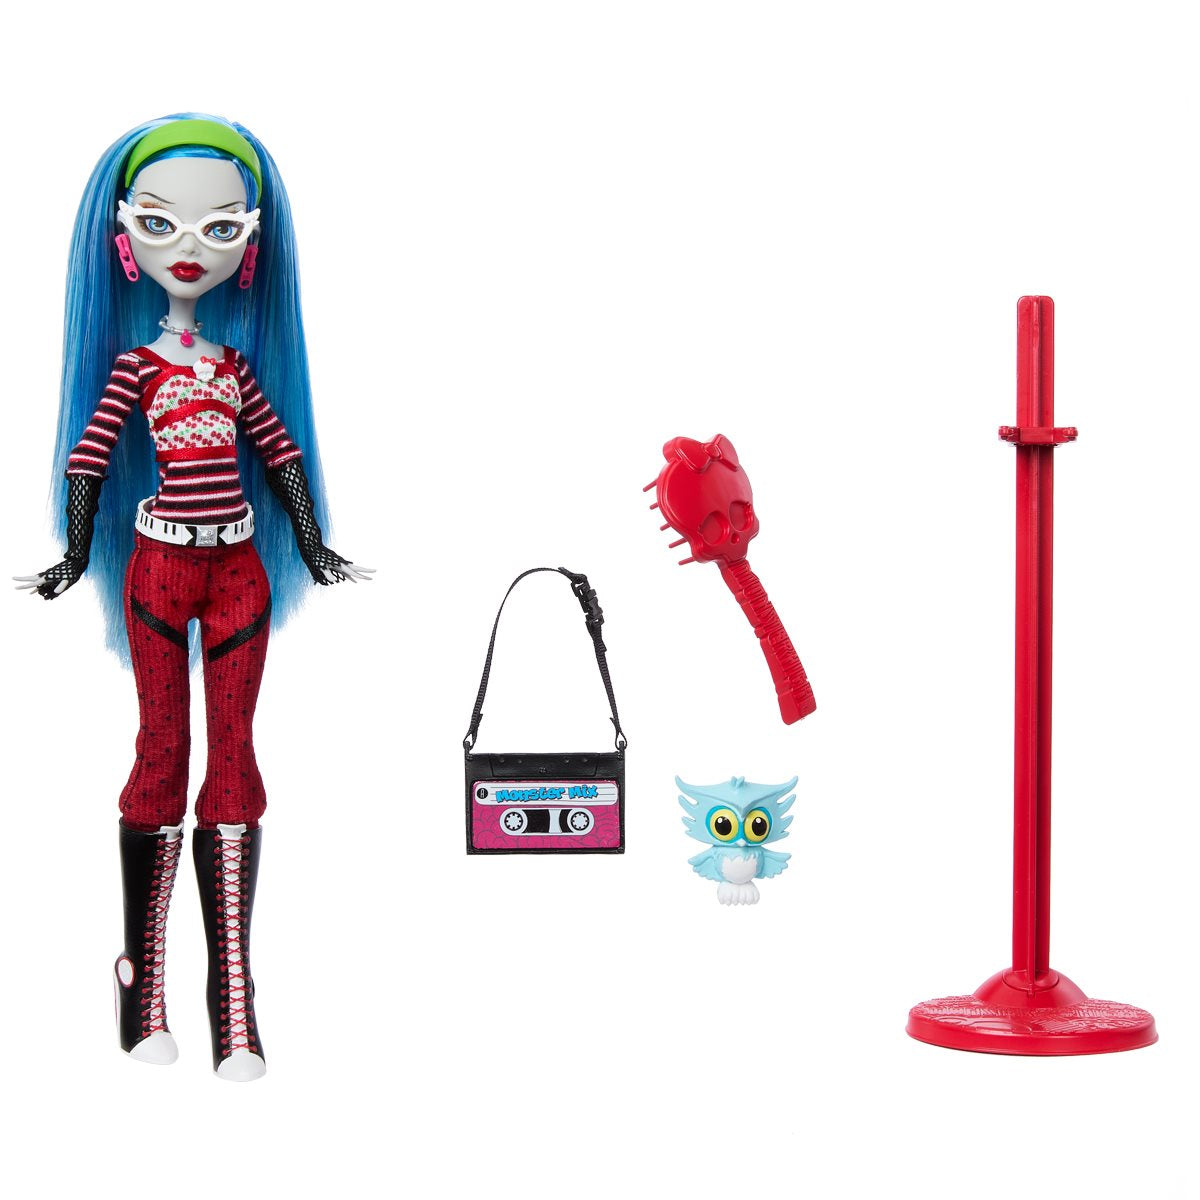 Booriginal Creeproduction Ghoulia Collectible Doll (Pre-Order)